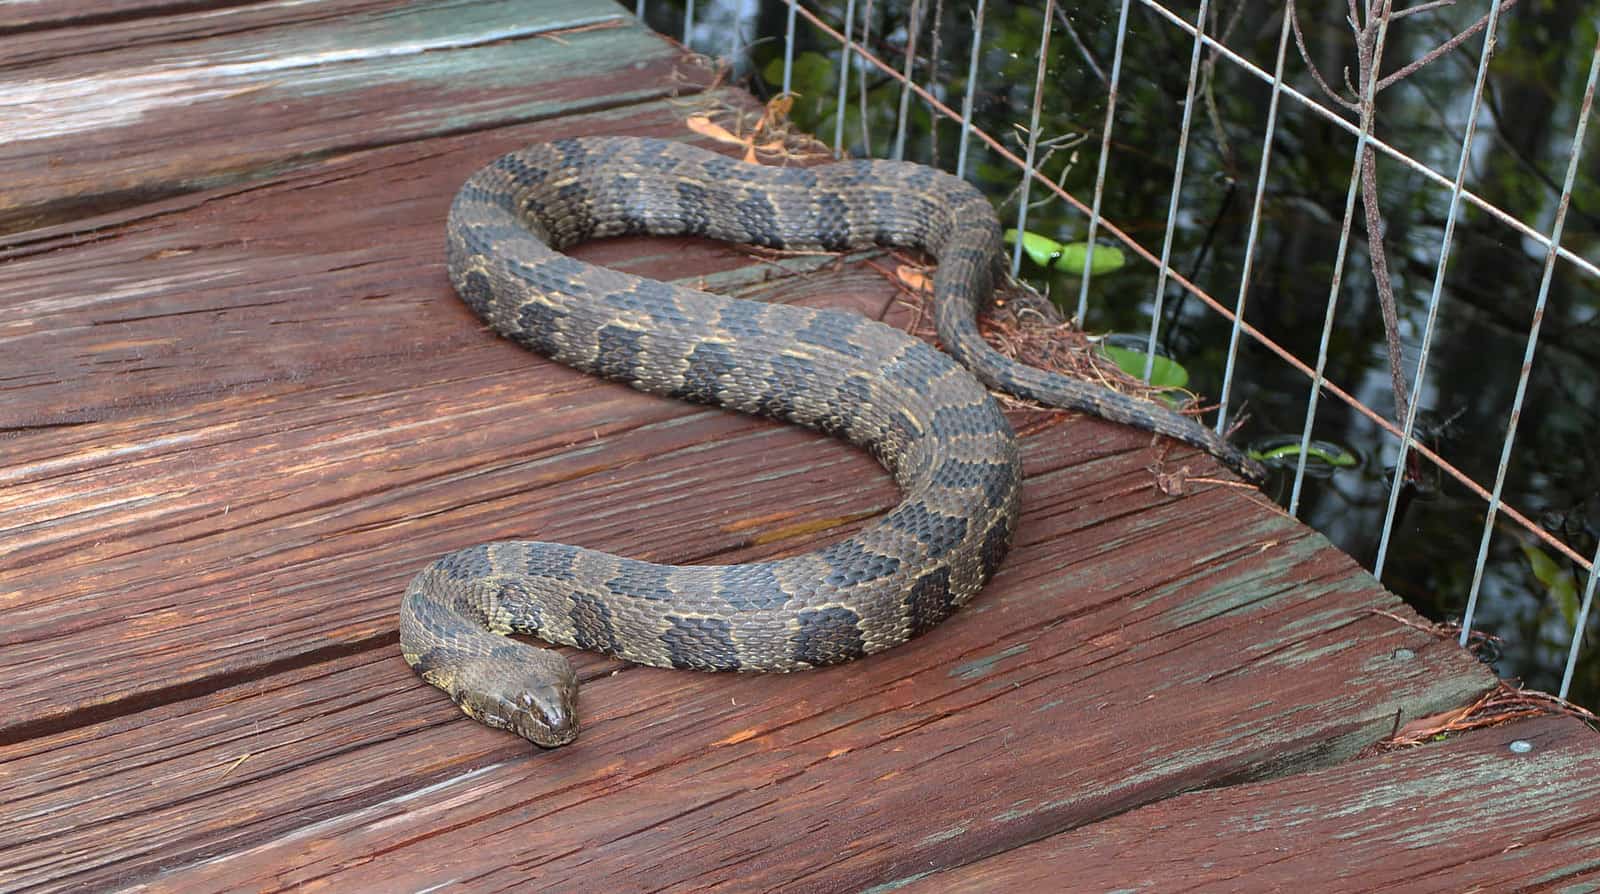 Brown Water Snake on top of wooden plank